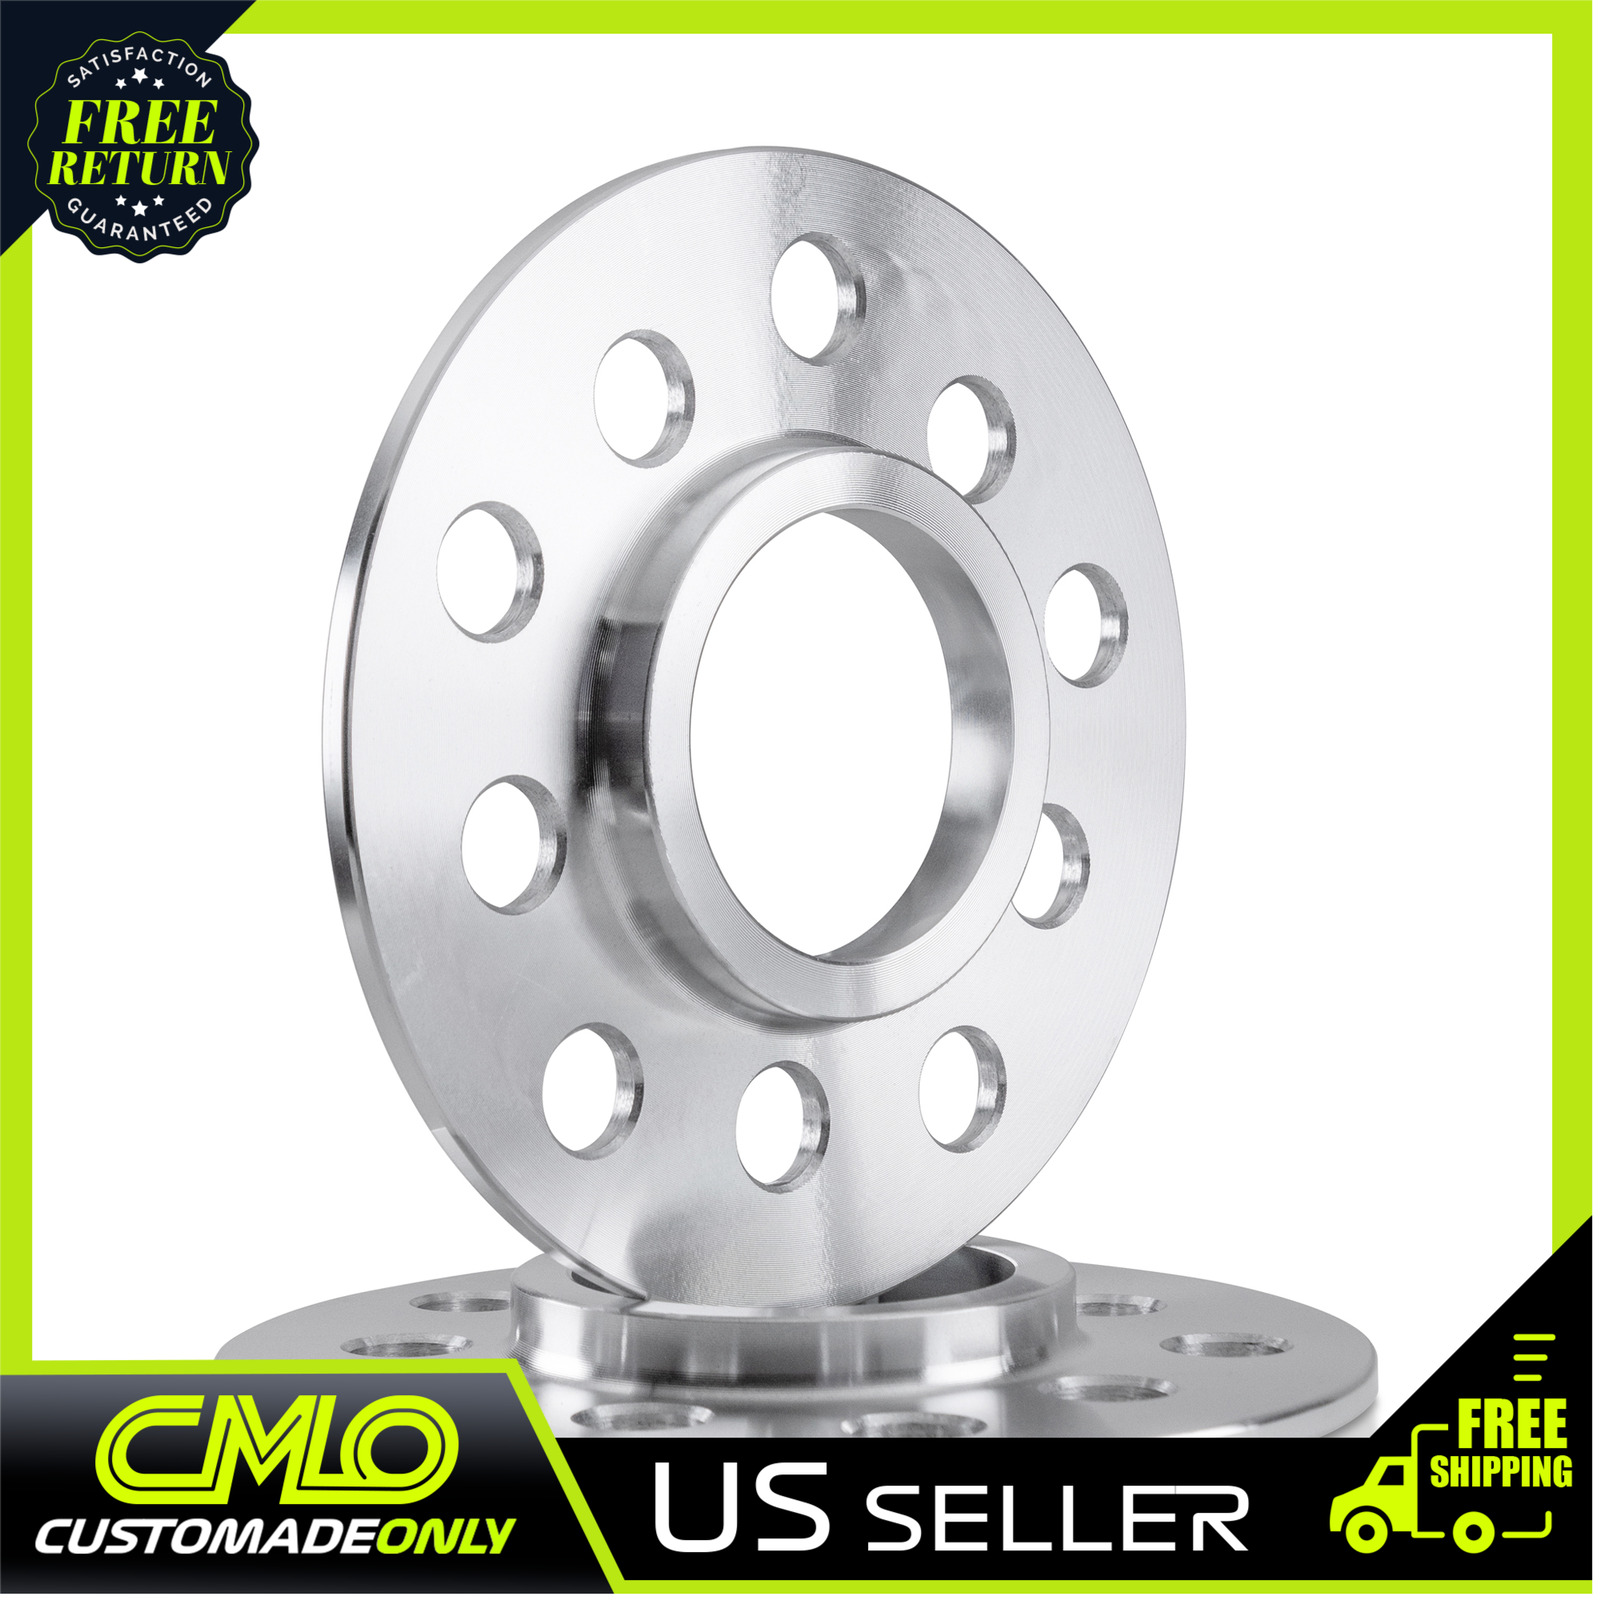 2pc 3mm Hubcentric Wheel Spacers | 5x114.3 5x100 | 56.1 Hub to 73.1 Wheel |